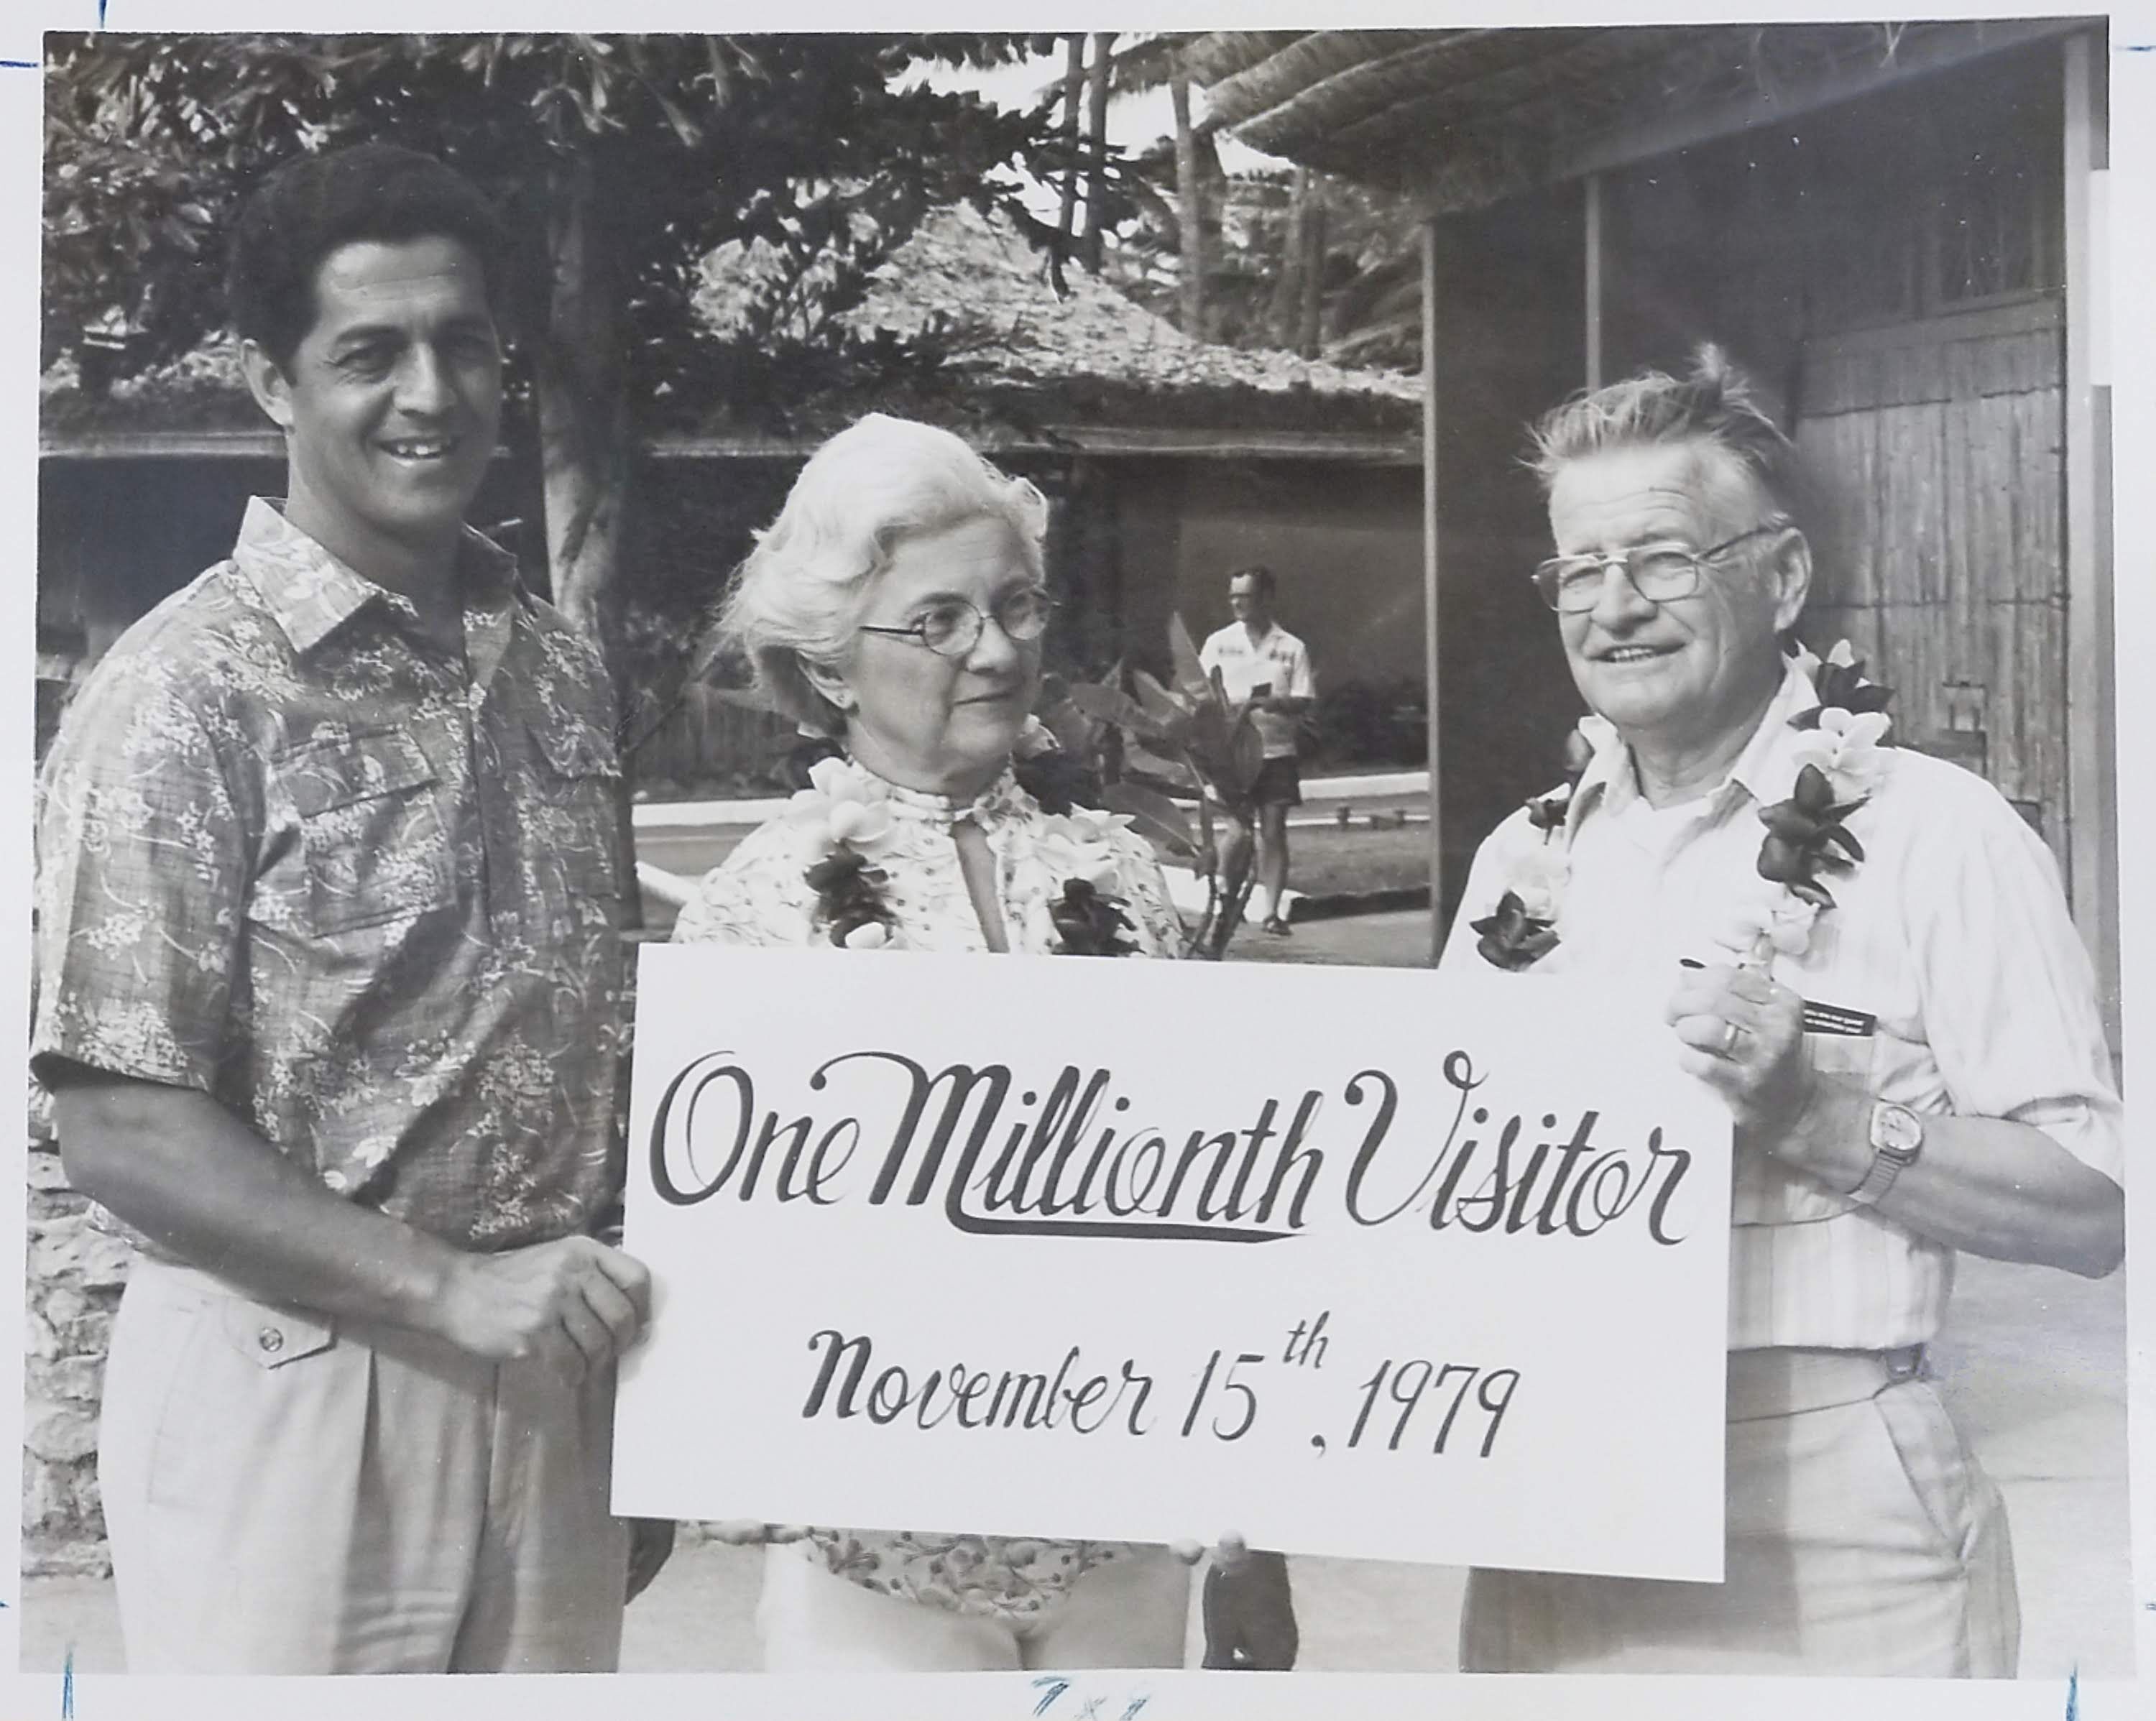 photo of Bill Craven , as President and General Manager of the Polynesian Cultural Center recognizing the one millionth guest at the Center.